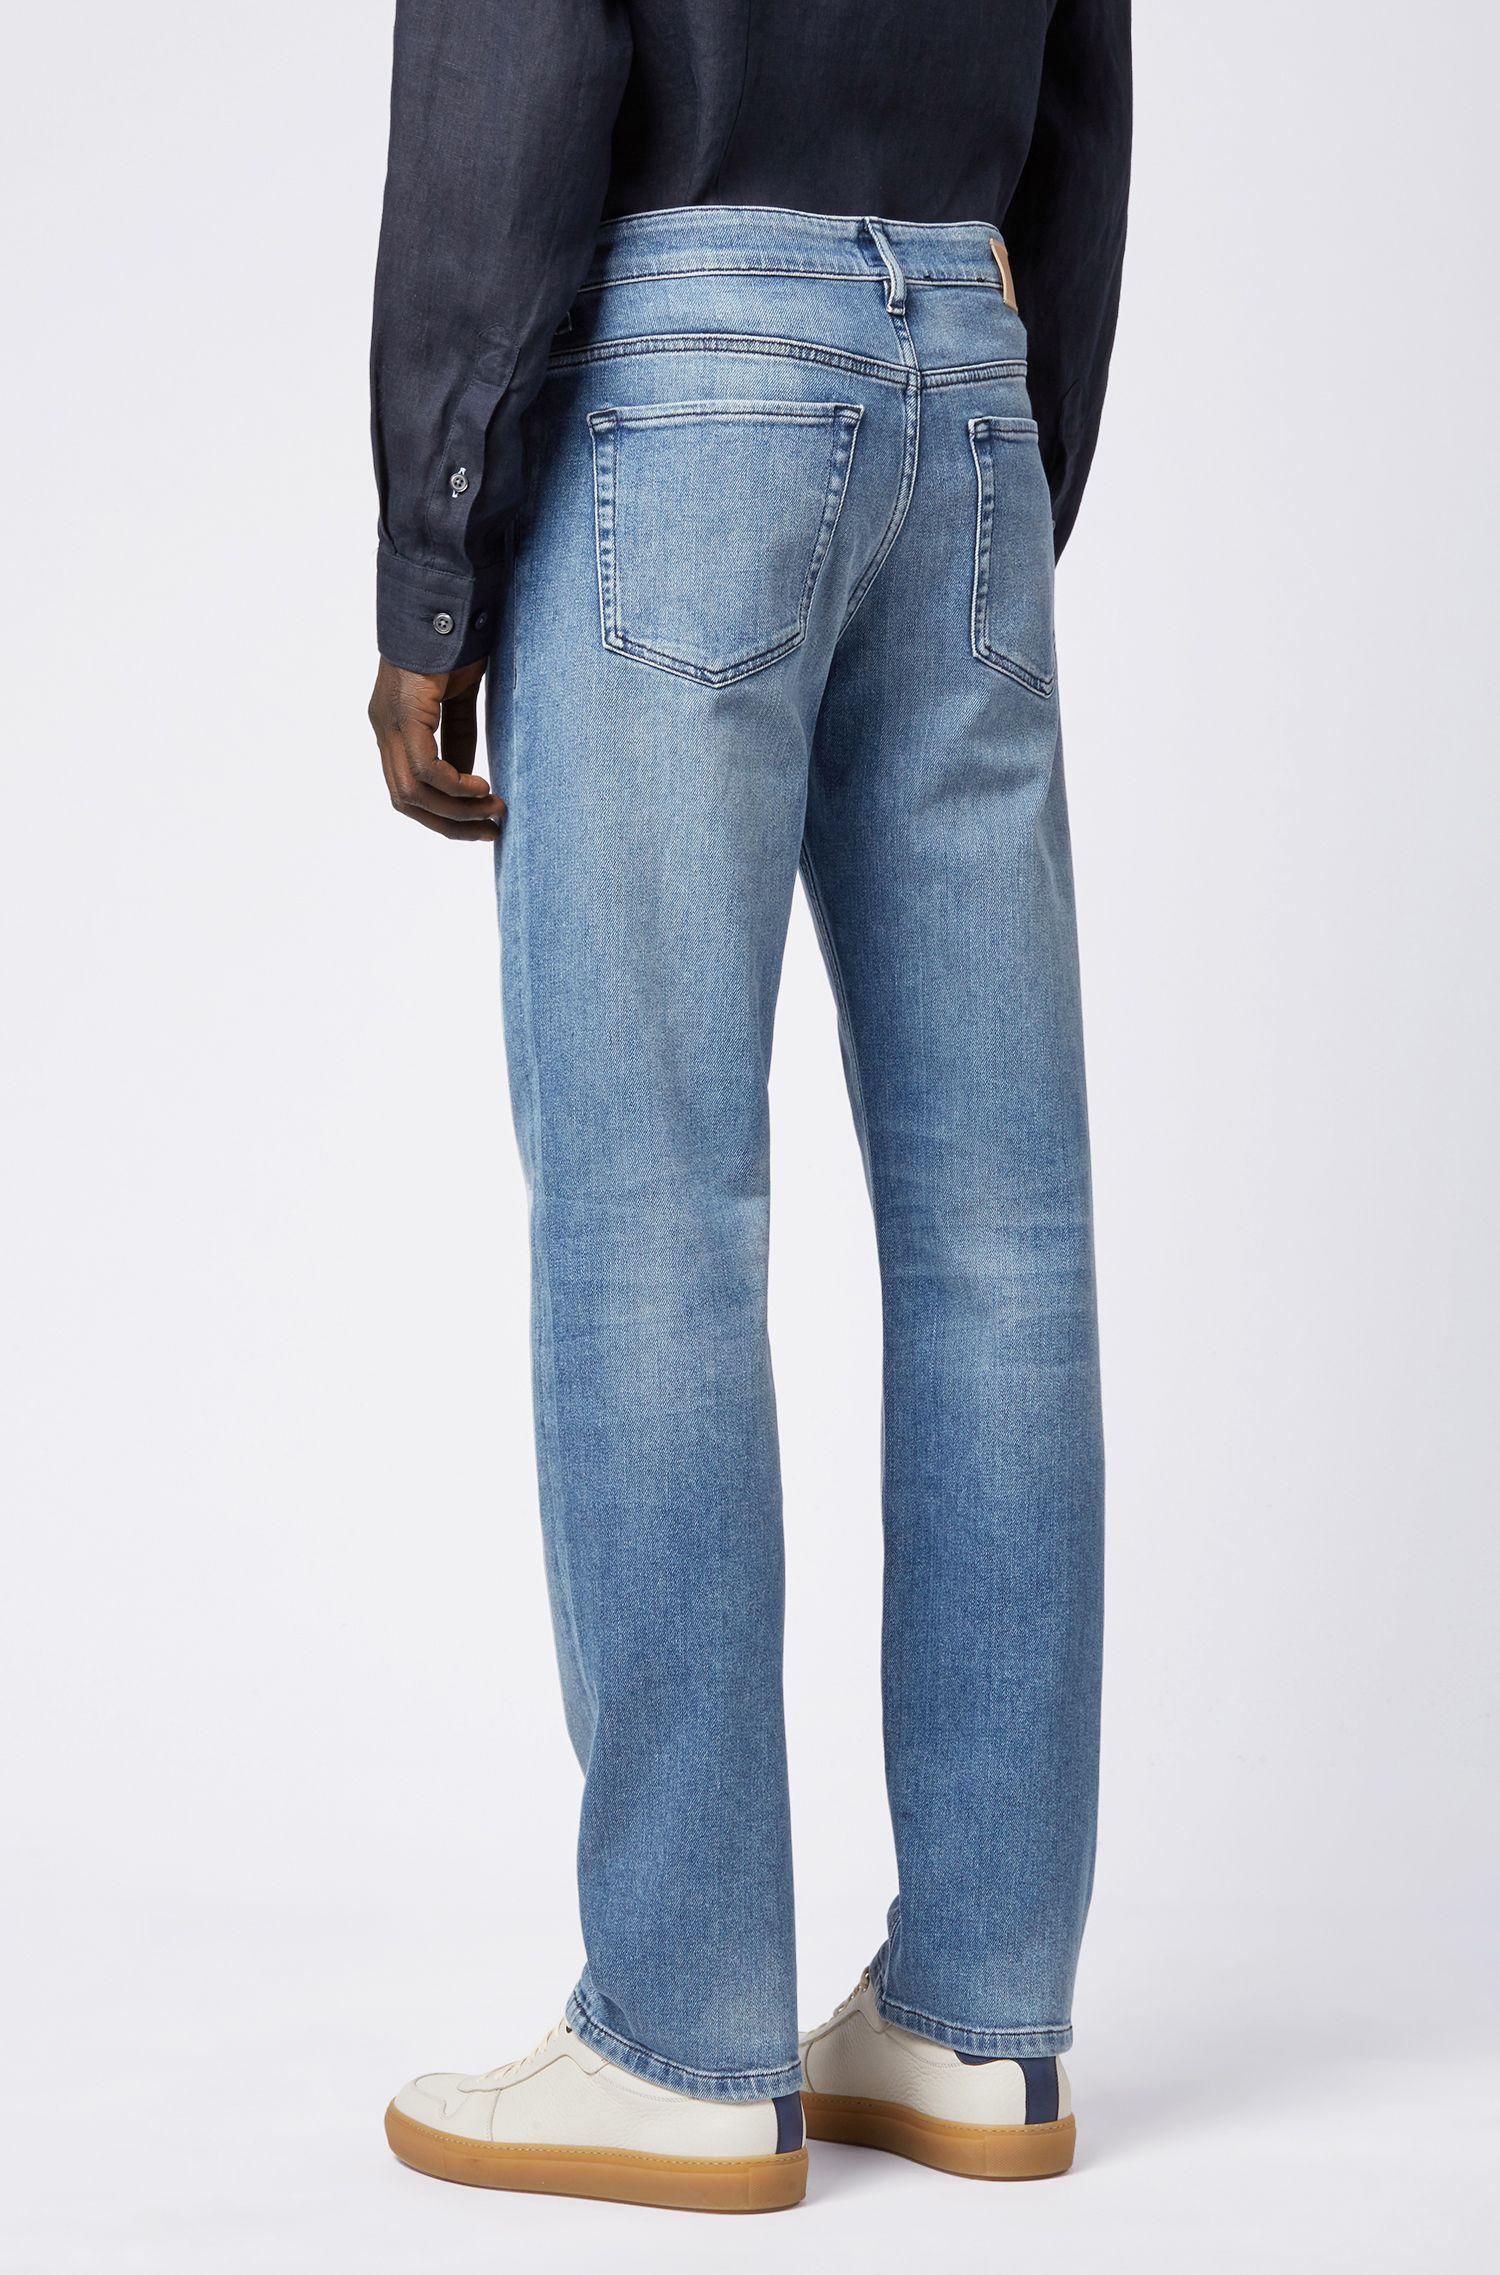 BOSS Relaxed-fit Jeans In Bright-blue Bci Denim for Men - Lyst